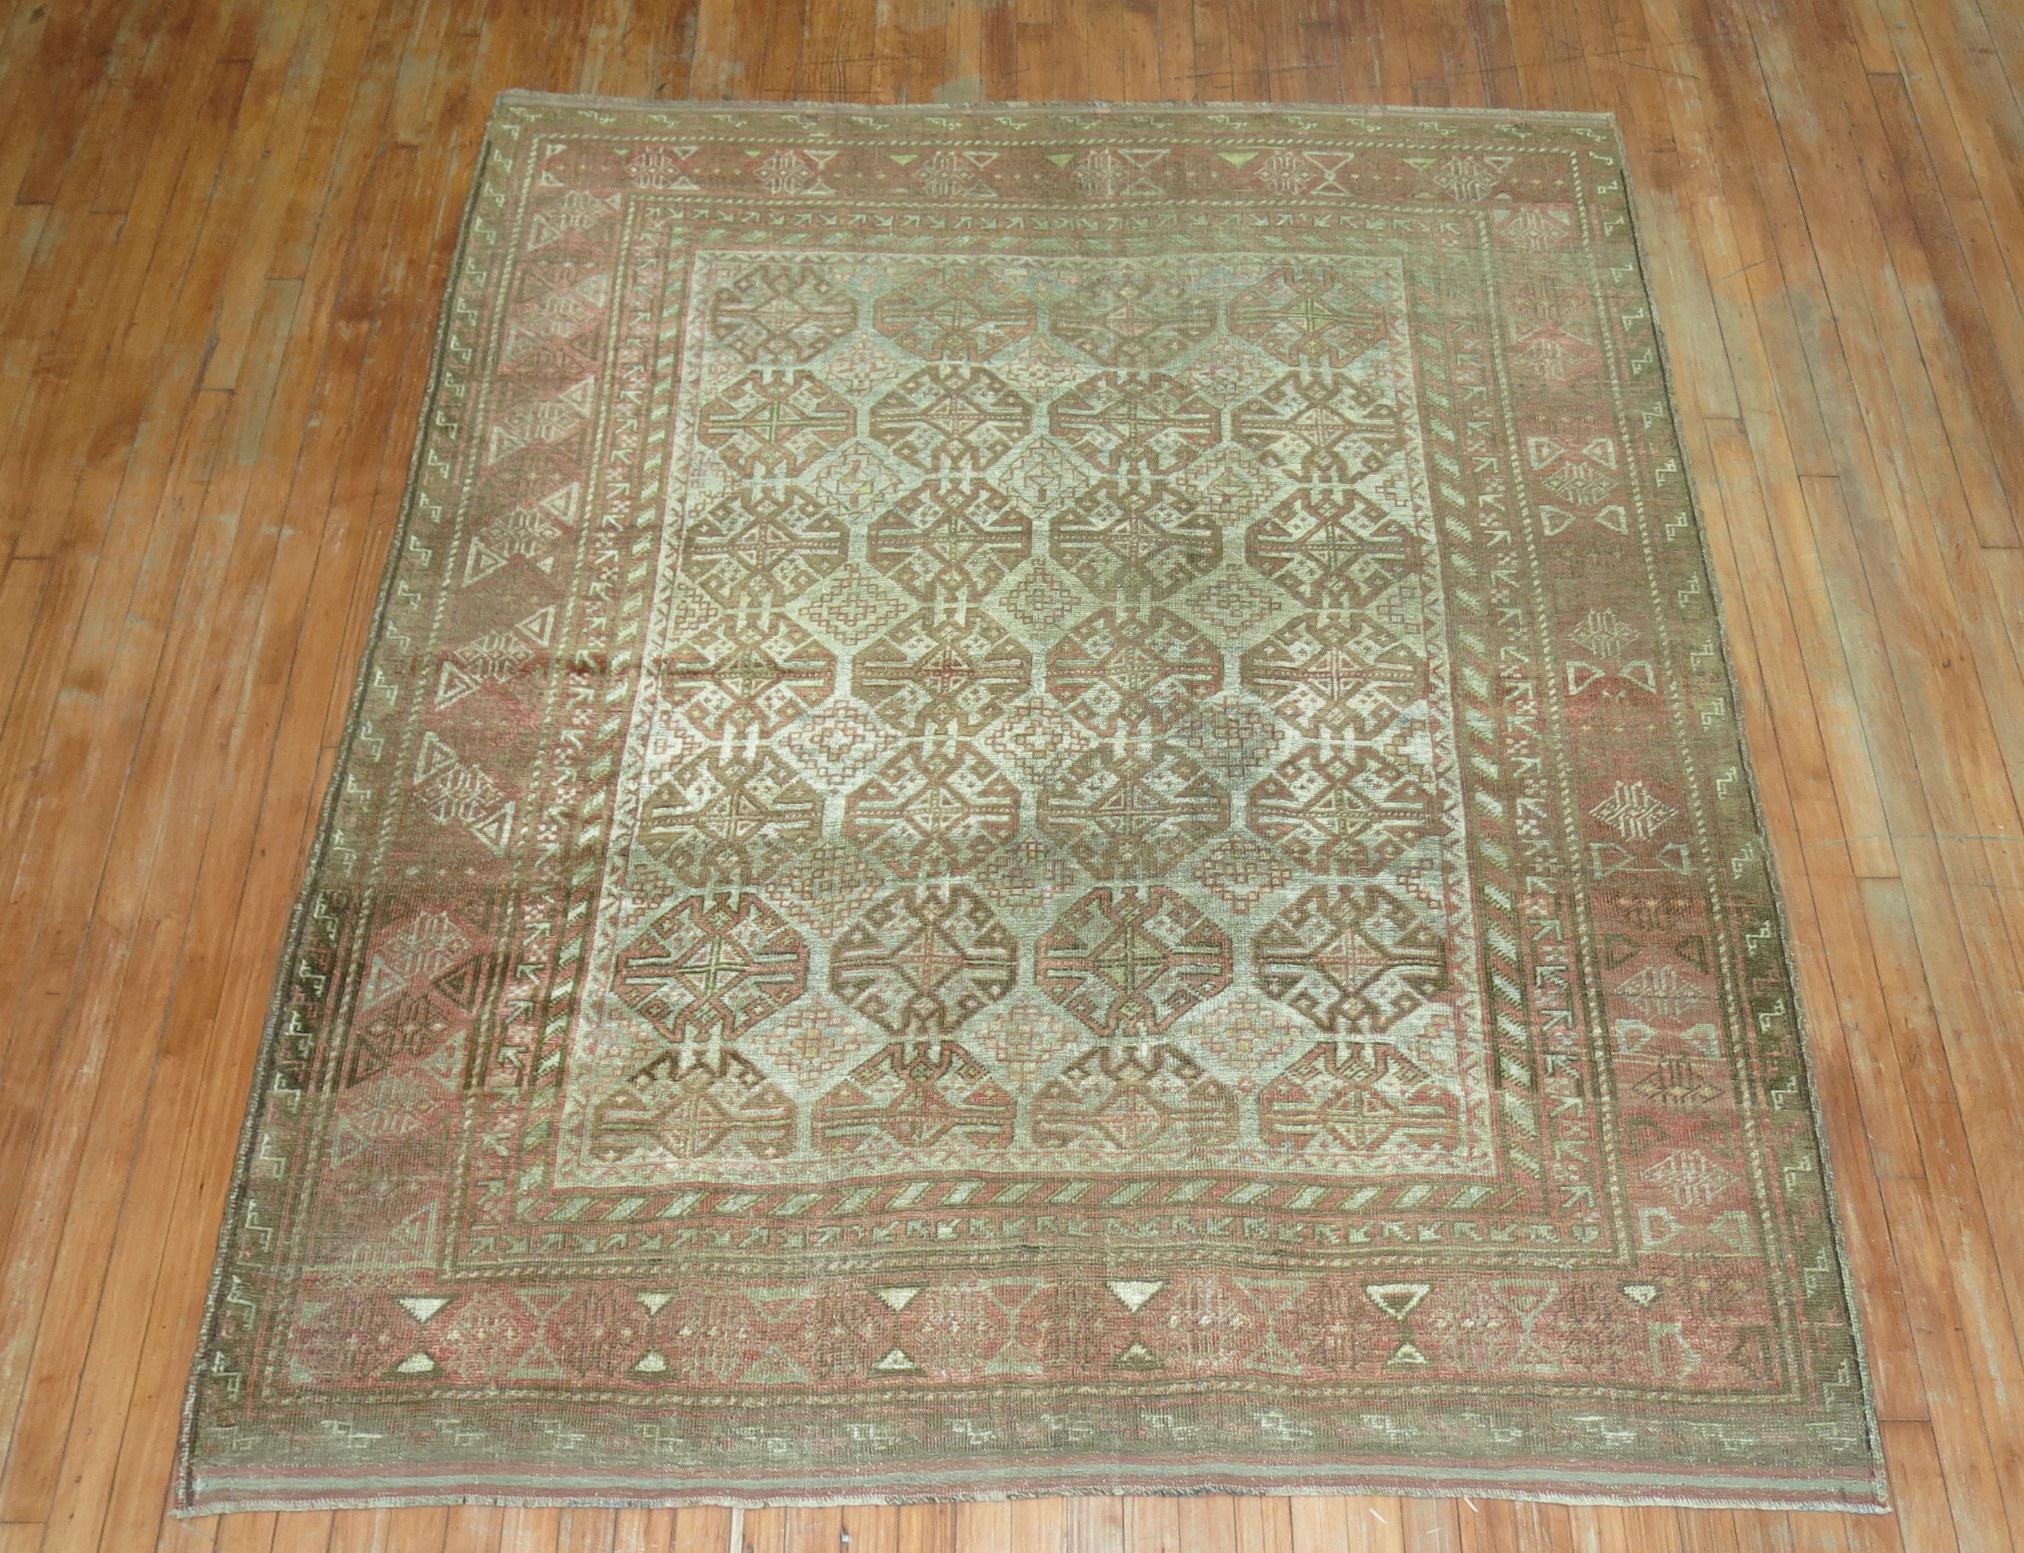 Pale brown, terracotta, soft blue and caramel Persian Balouch carpet from the early 20th century.